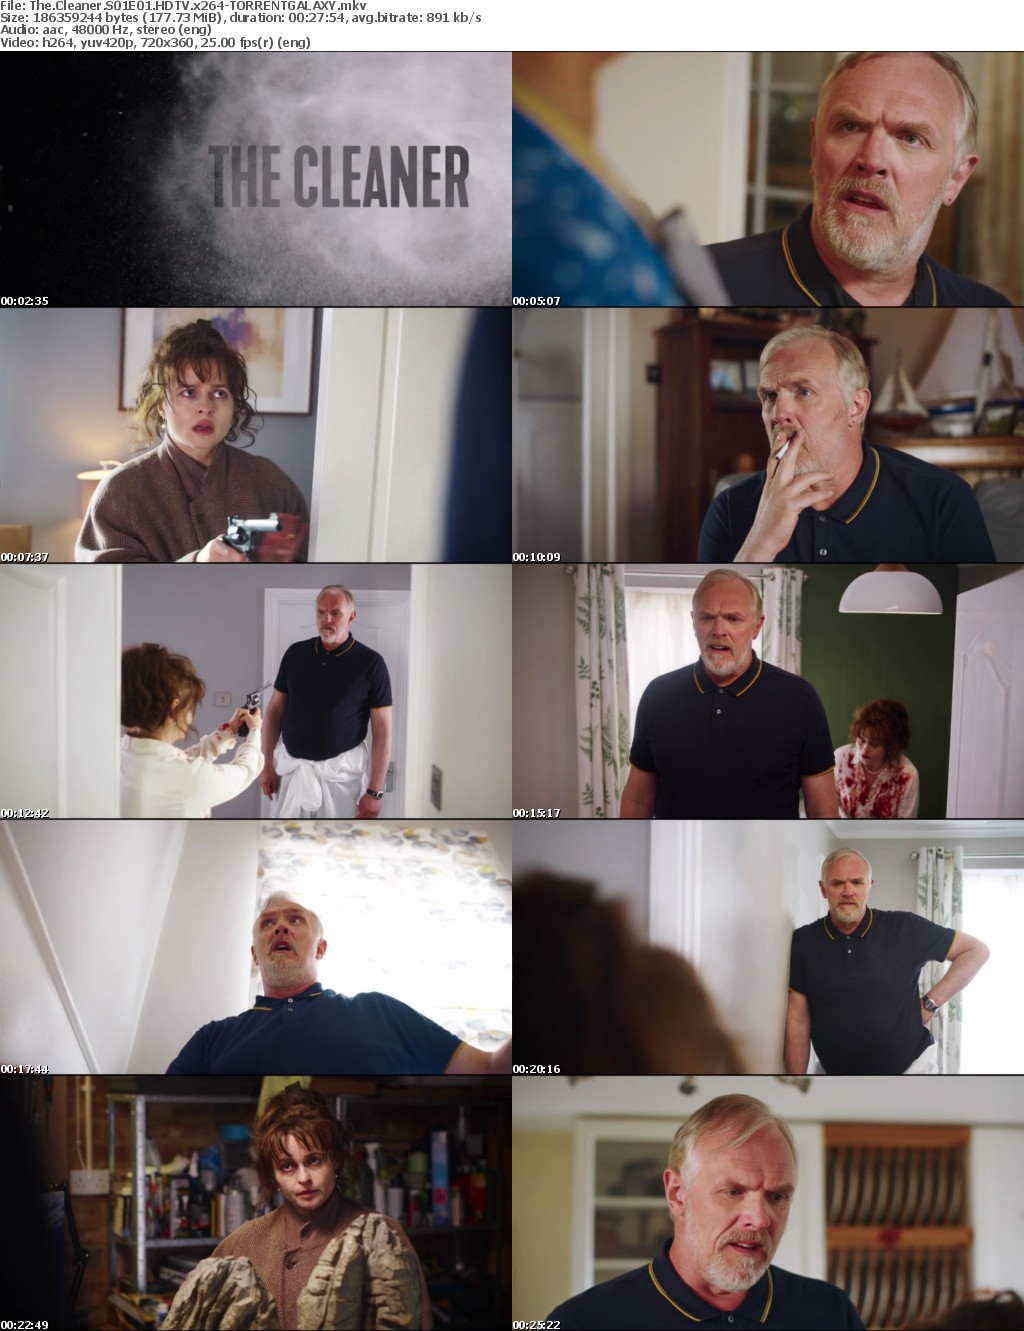 The Cleaner S01E01 HDTV x264-GALAXY